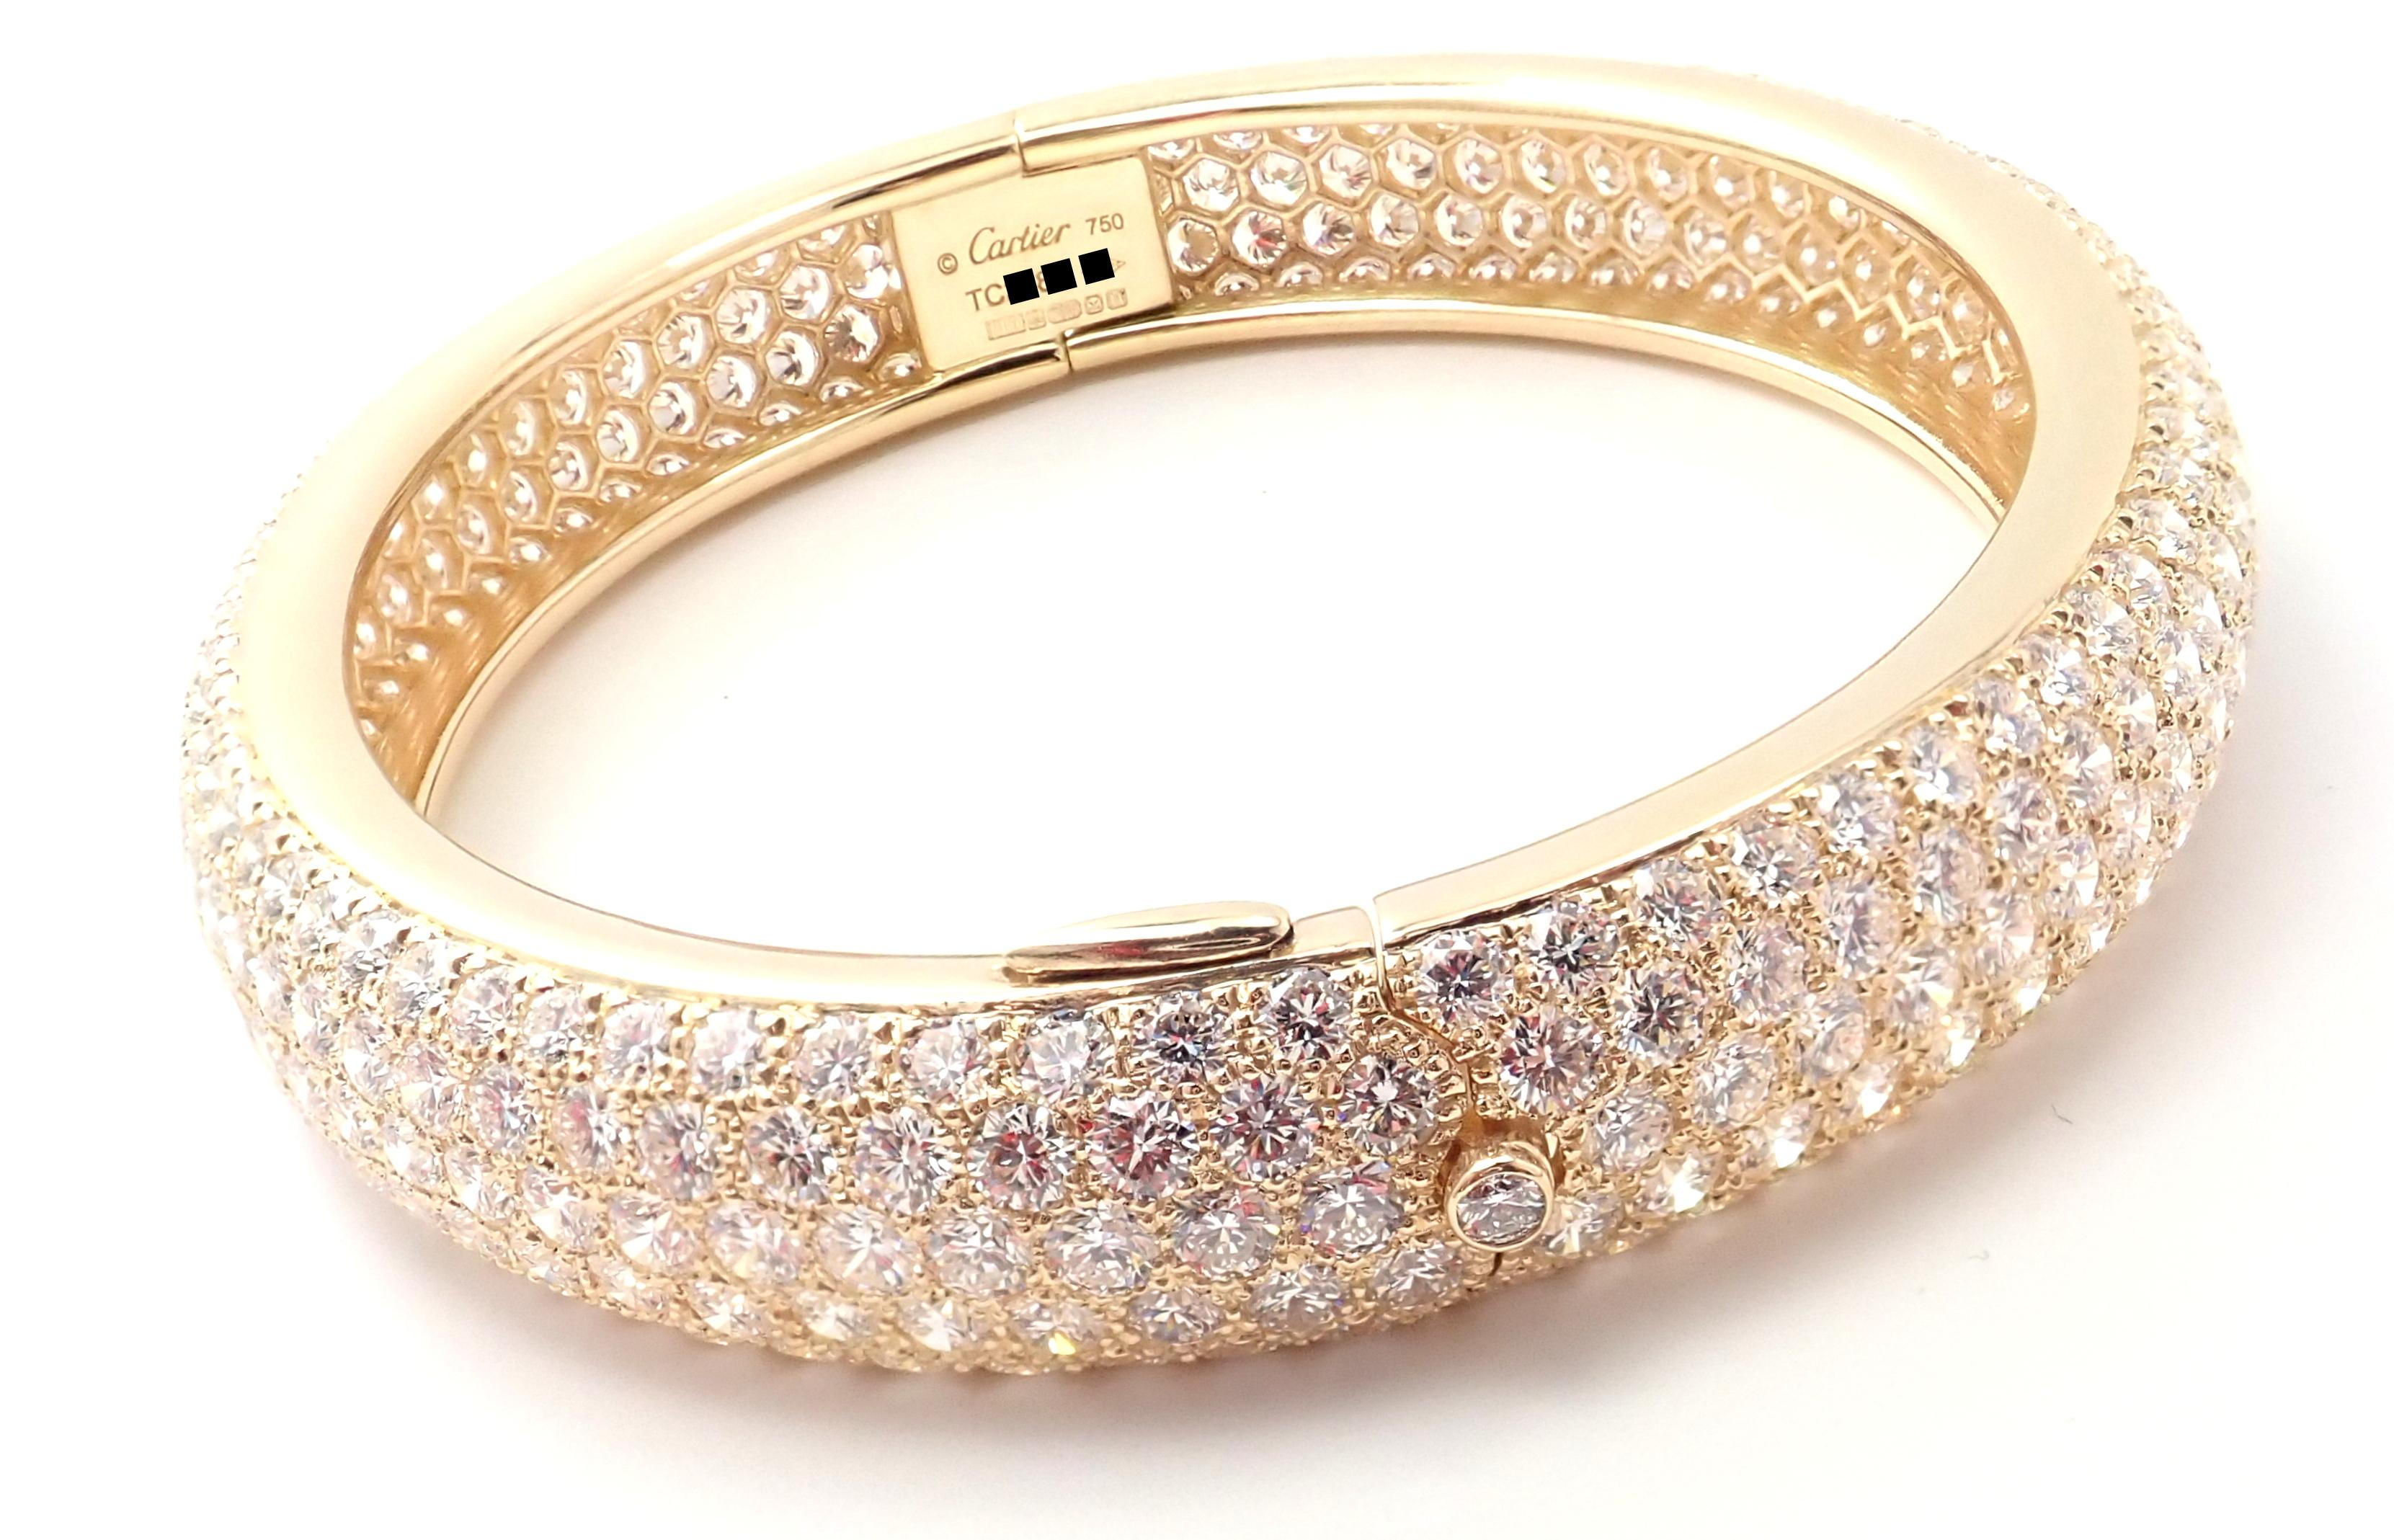 18k Yellow Gold Diamond Pave Etincelle Bangle Bracelet by Cartier. 
With 371 round brilliant cut diamonds VVS1 clarity, E color total weight approximately 20ct
Details: 
Weight: 47 grams
Length: 7